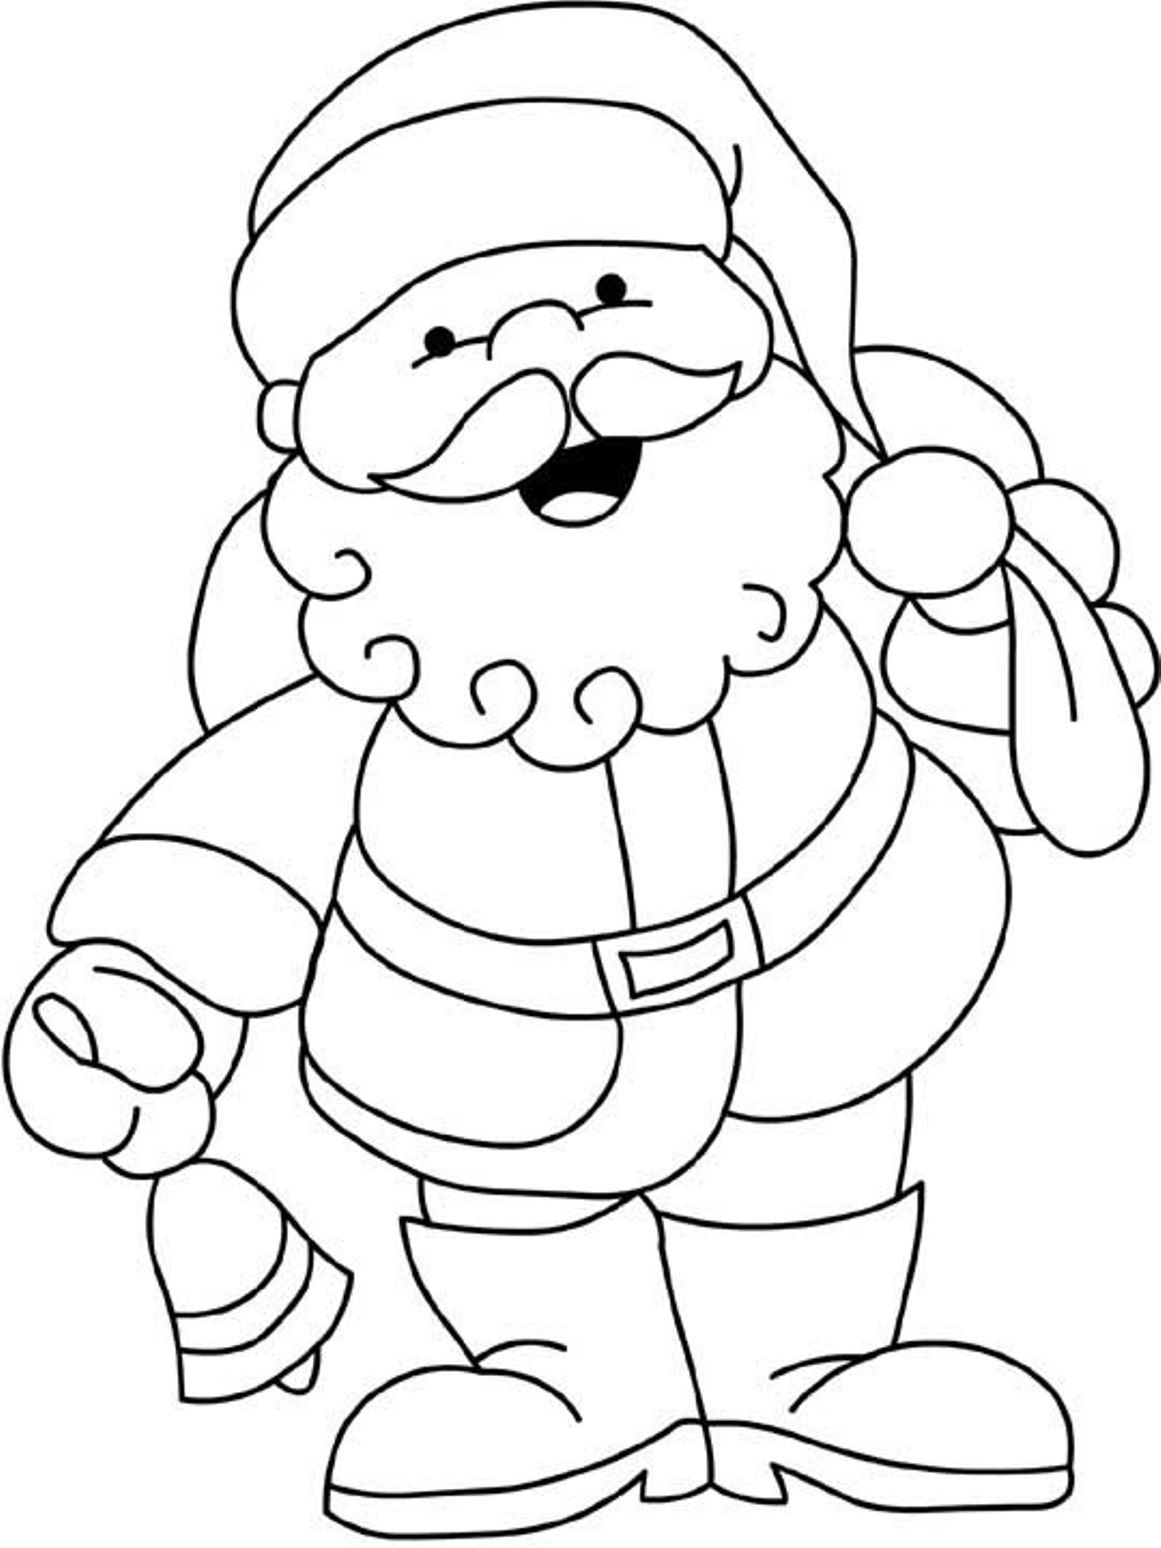 Bell And Santa Coloring Page | Christmas Coloring pages of ...